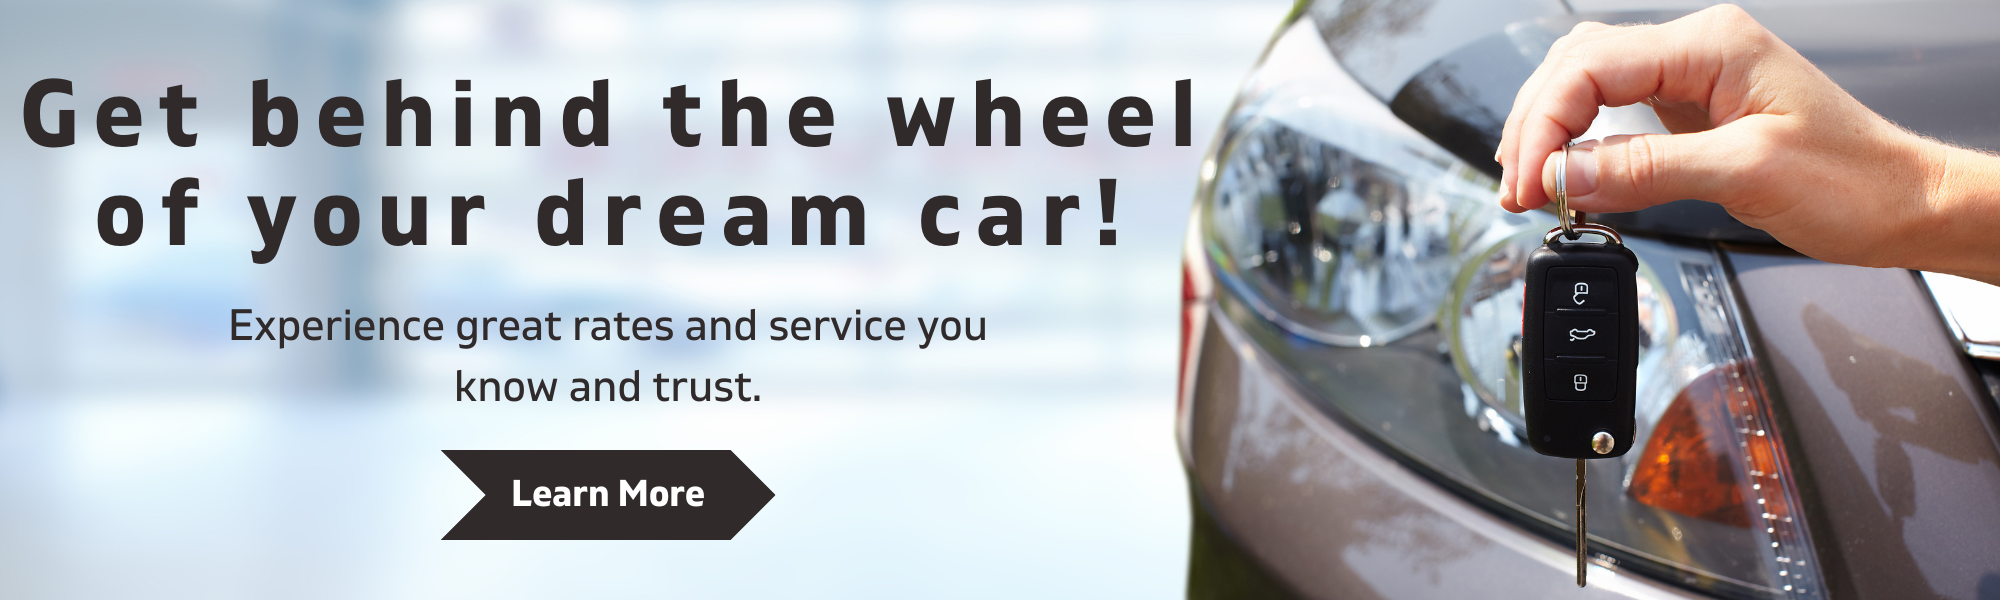 Get behind the wheel of your dream car! Experience great rates and service you know and trust. Learn More